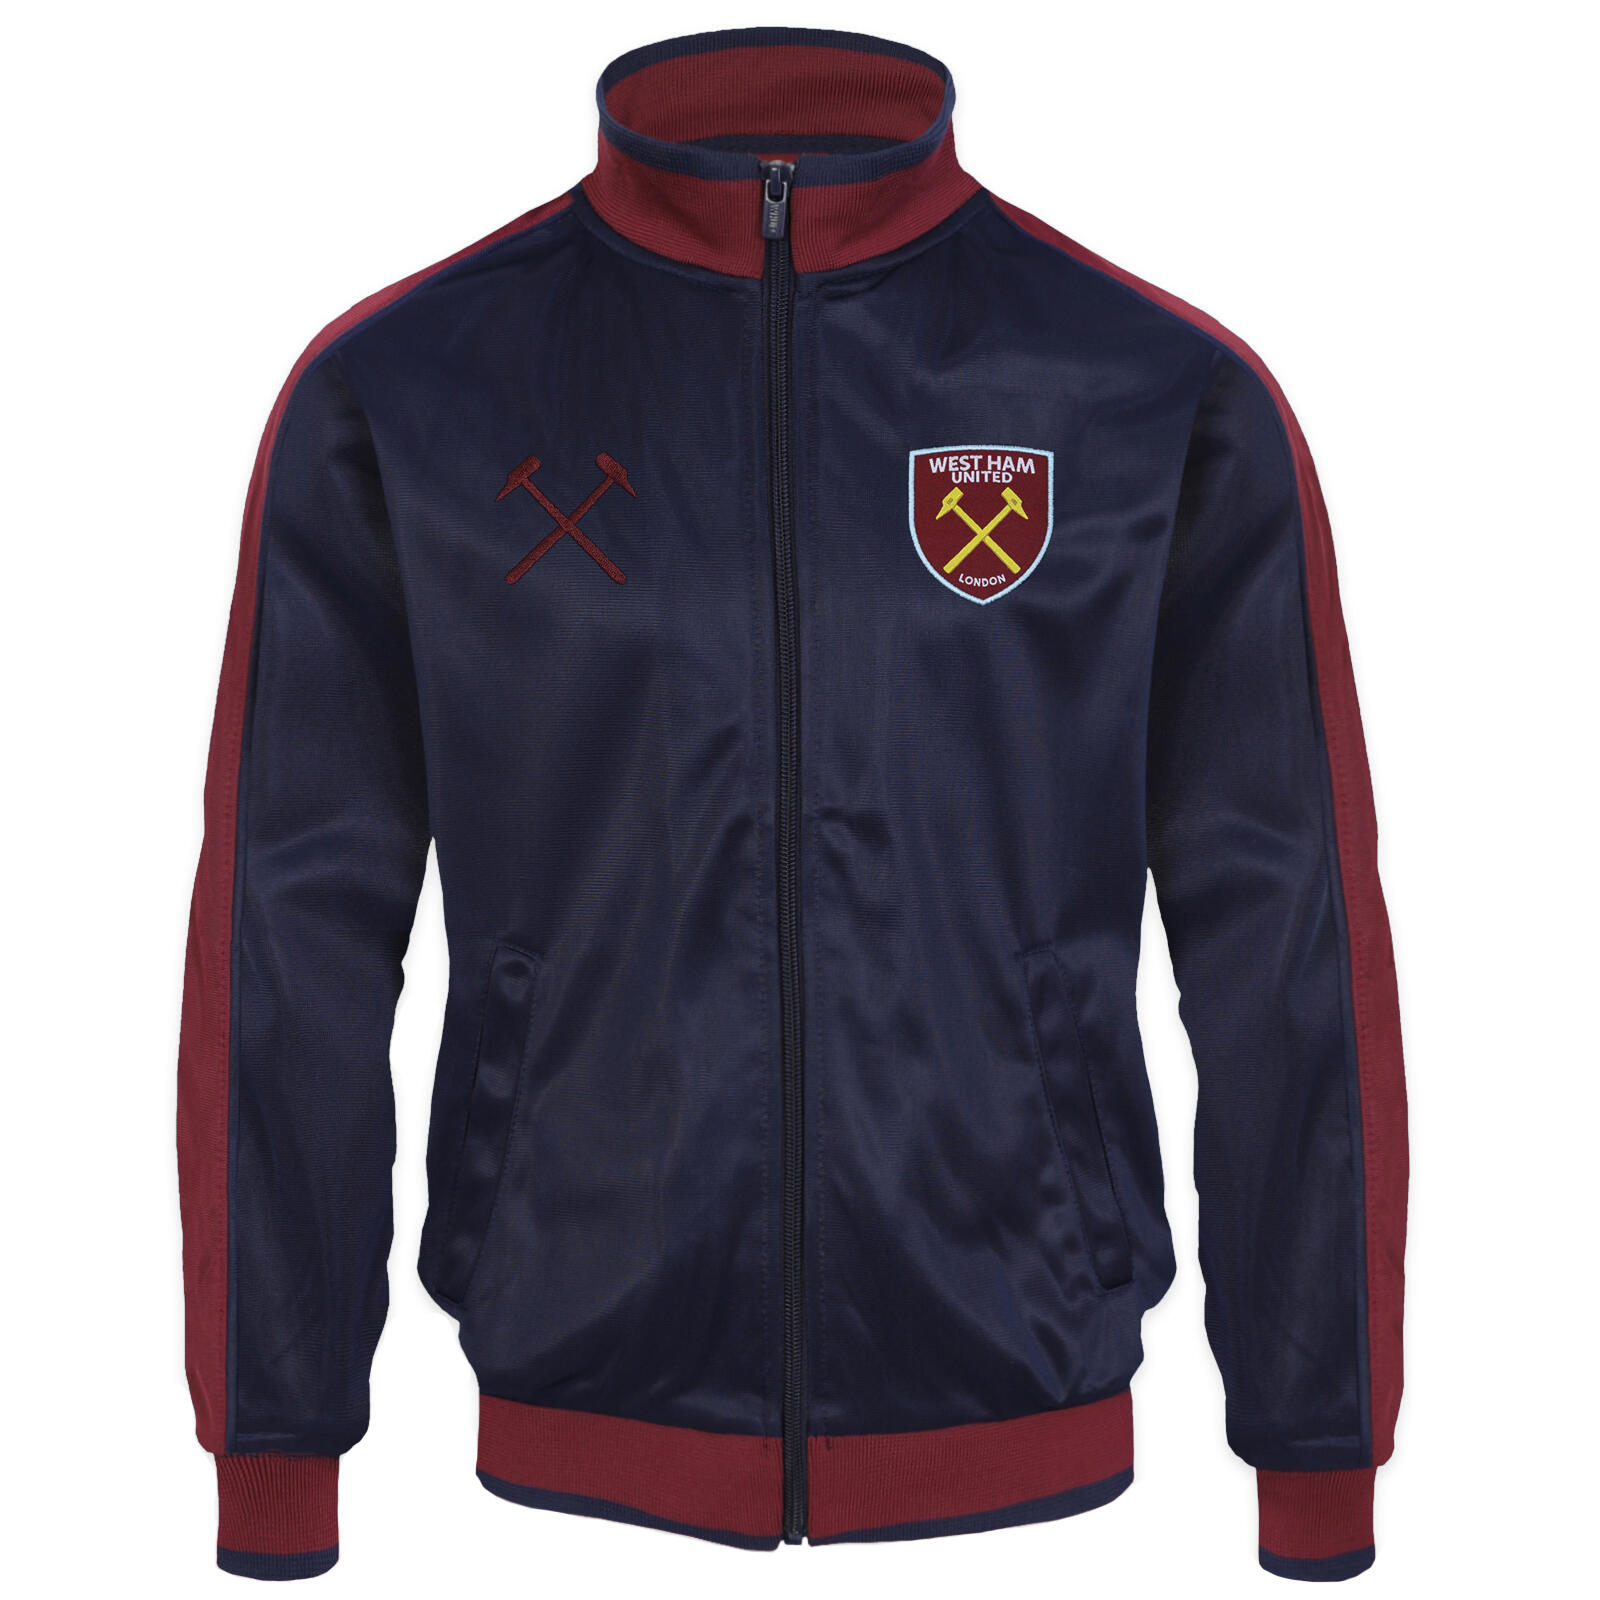 WEST HAM UNITED West Ham United Mens Jacket Track Top Retro OFFICIAL Football Gift